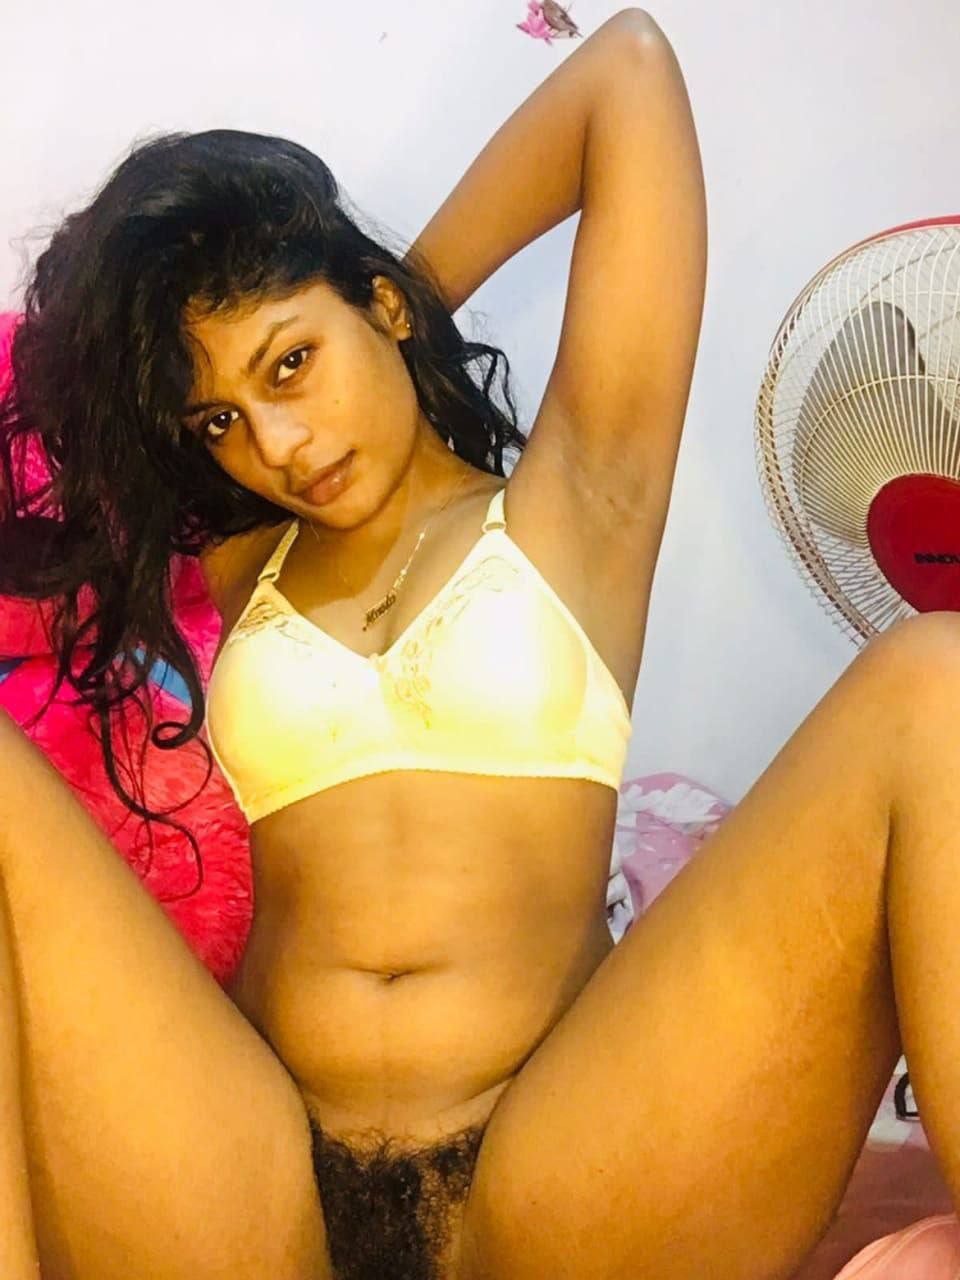 Girls Showing Off Pussy - Indian Girl Nude Showing Her Hairy Pussy | Desixnxx2.Net